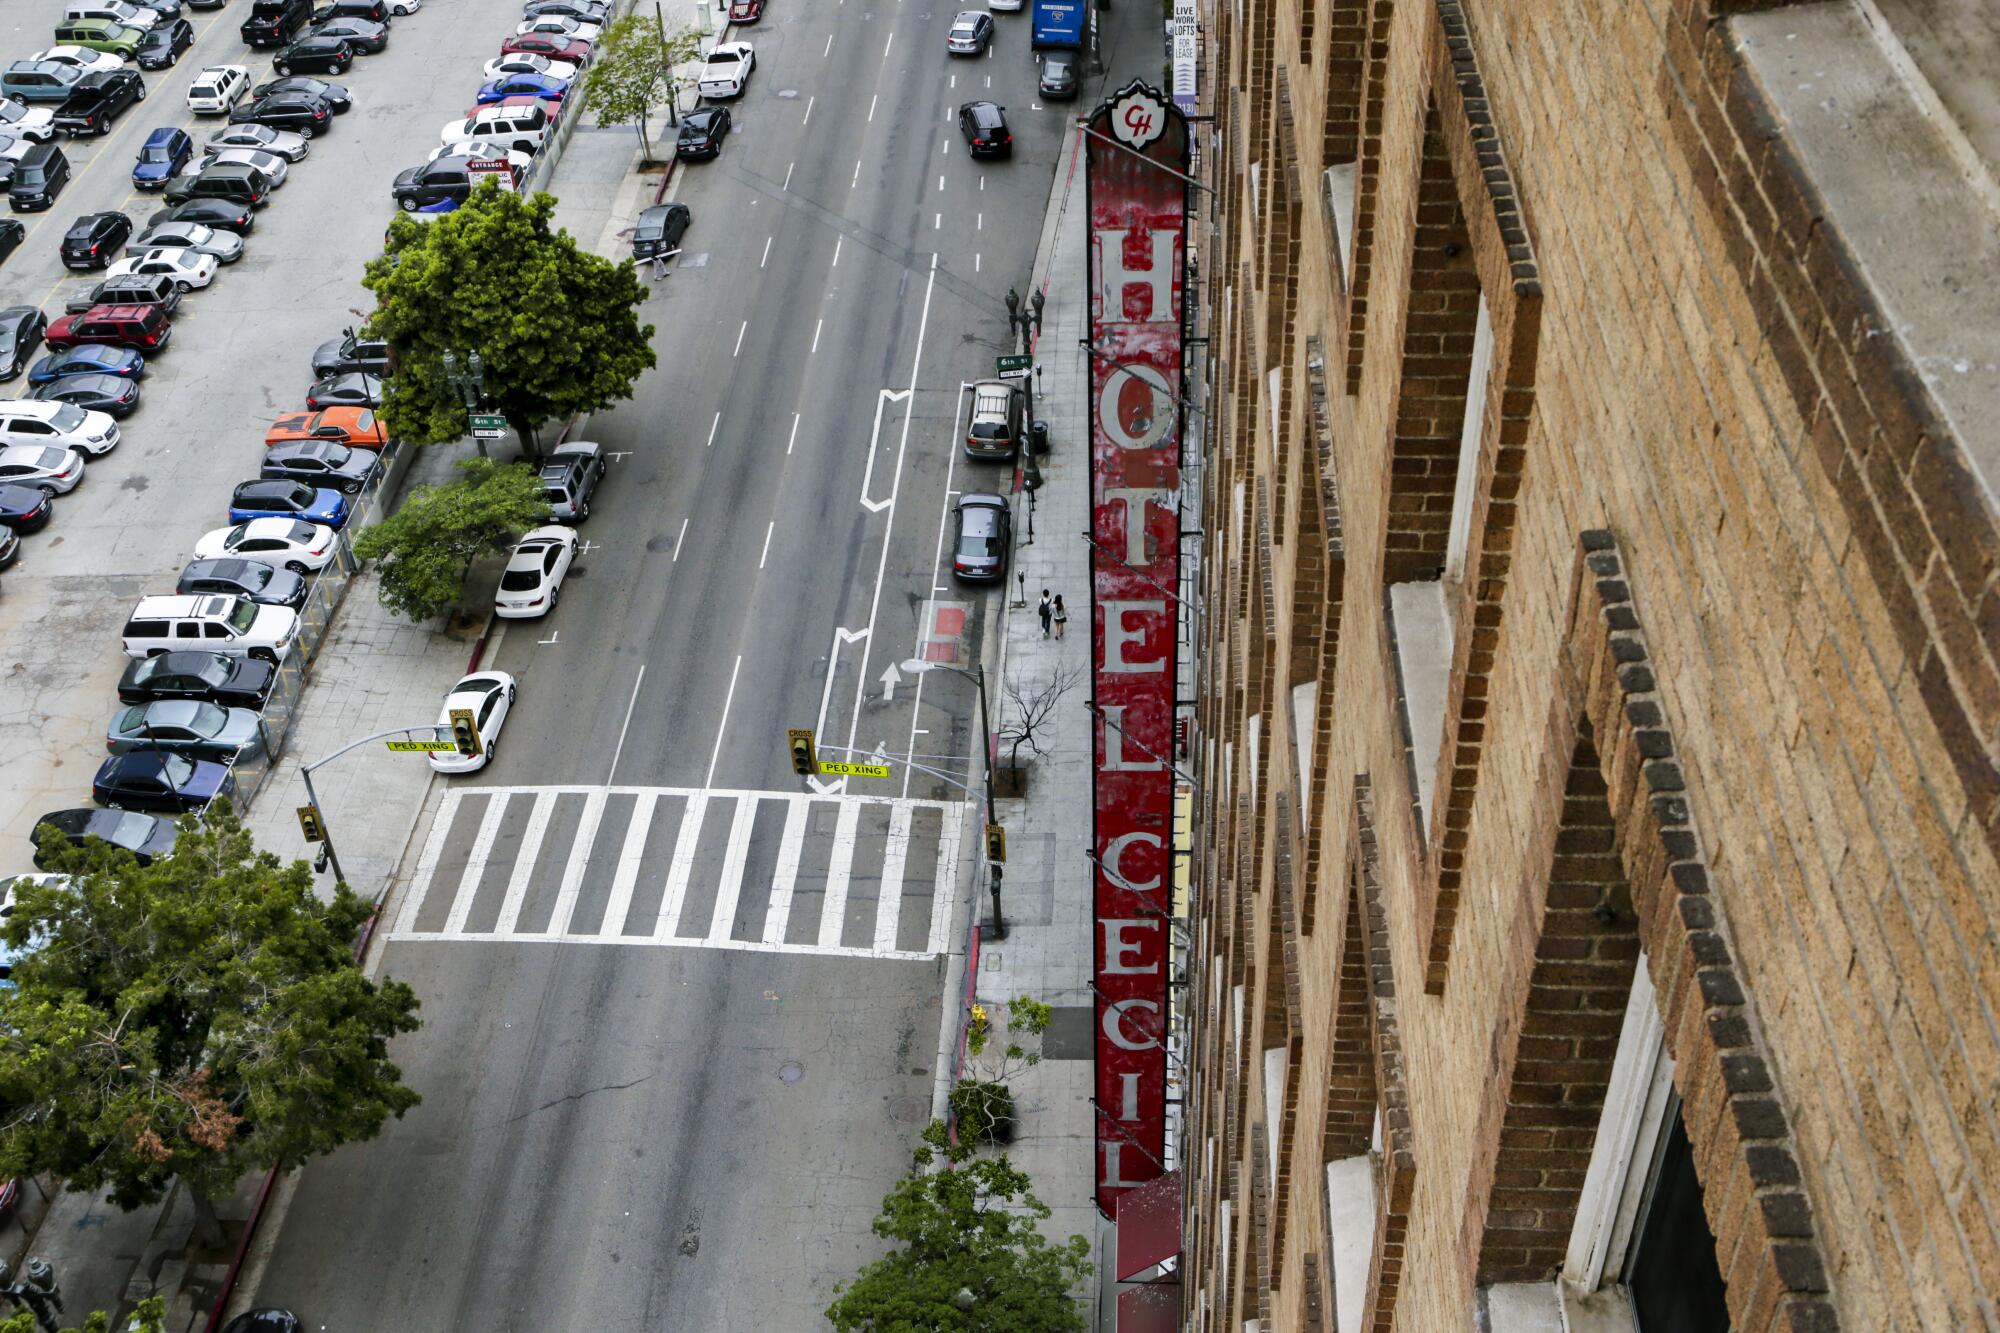 A view of the Cecil Hotel in downtown Los Angeles.